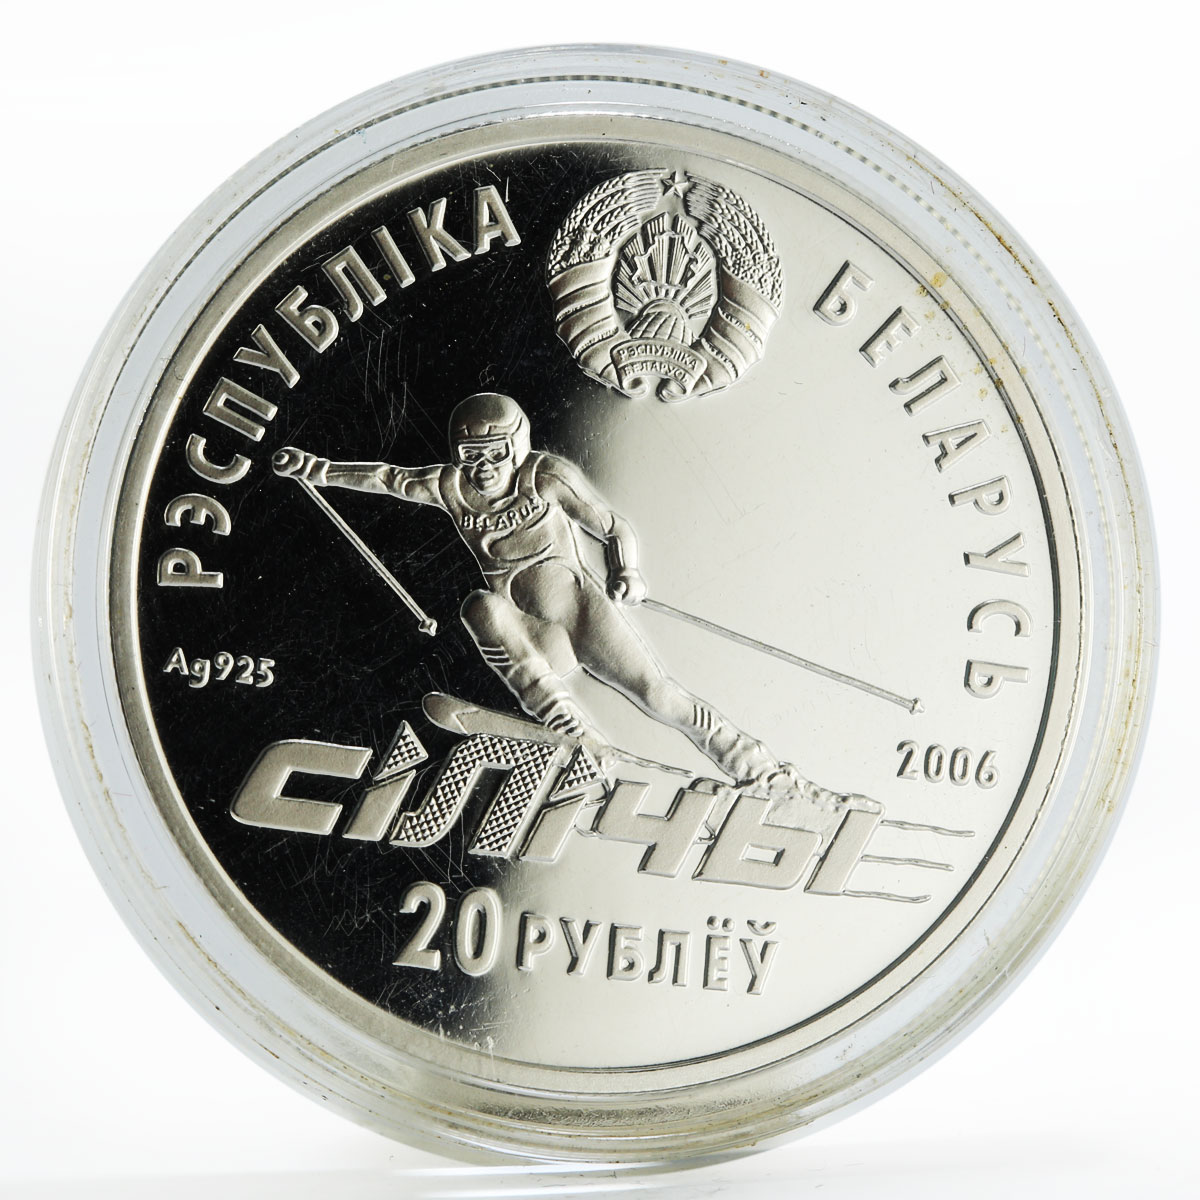 Belarus 20 rubels Ski Center Silichy proof silver coin 2006